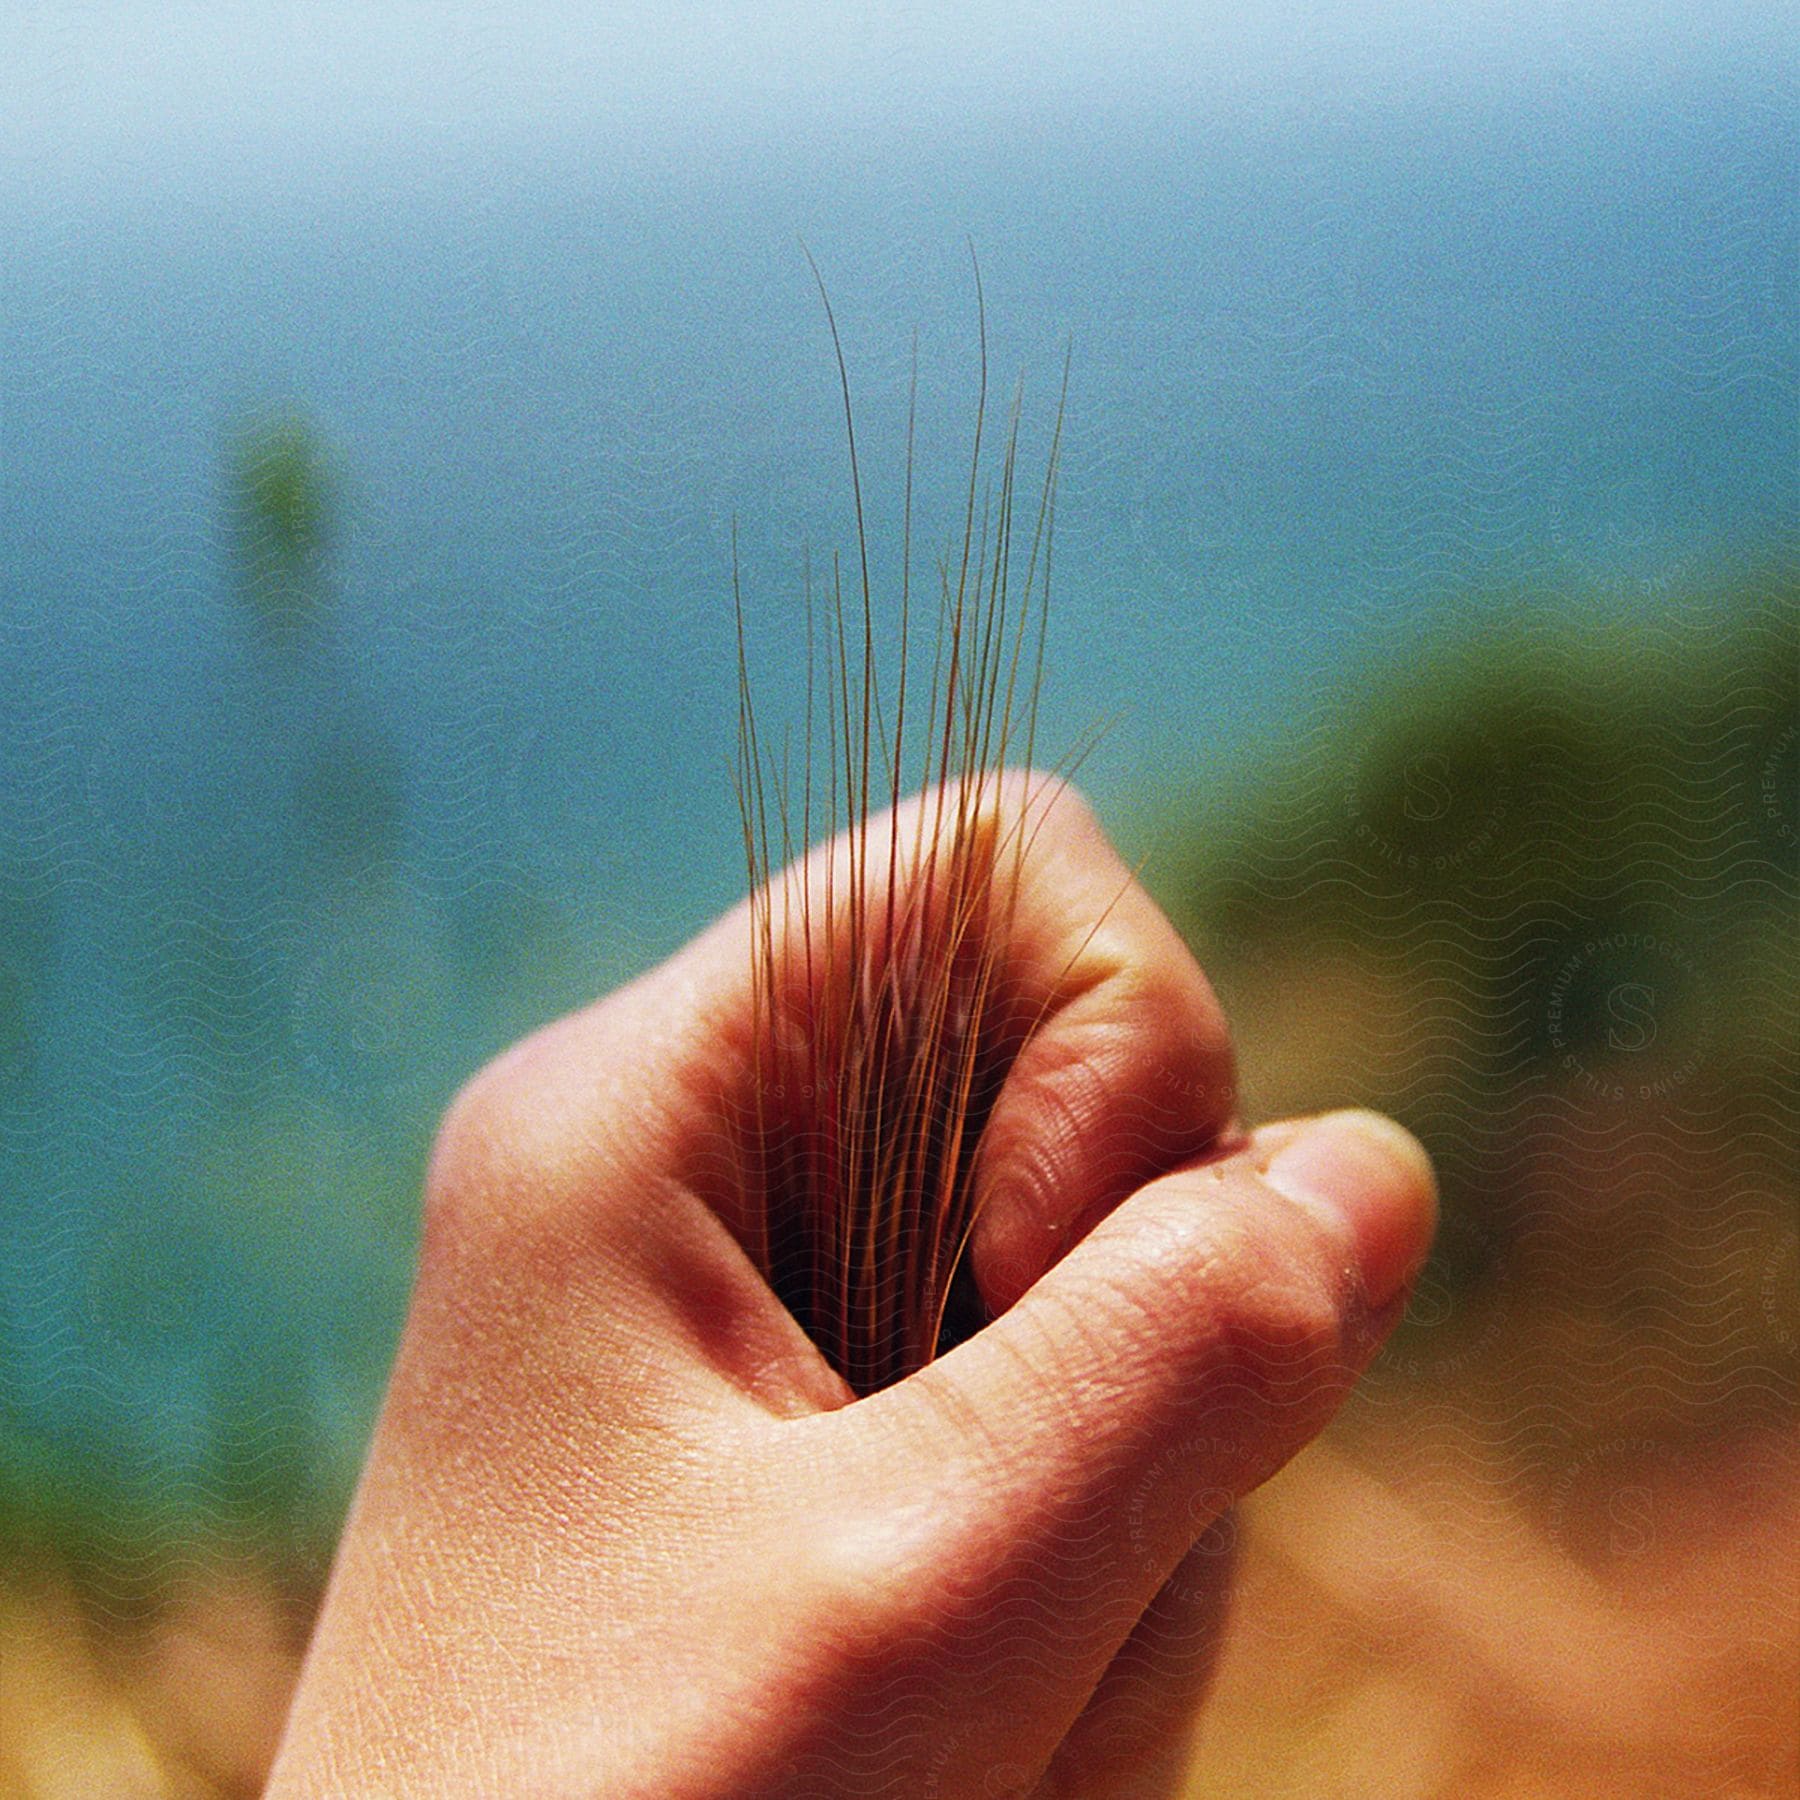 close up of a closed hand holding yellow grass.